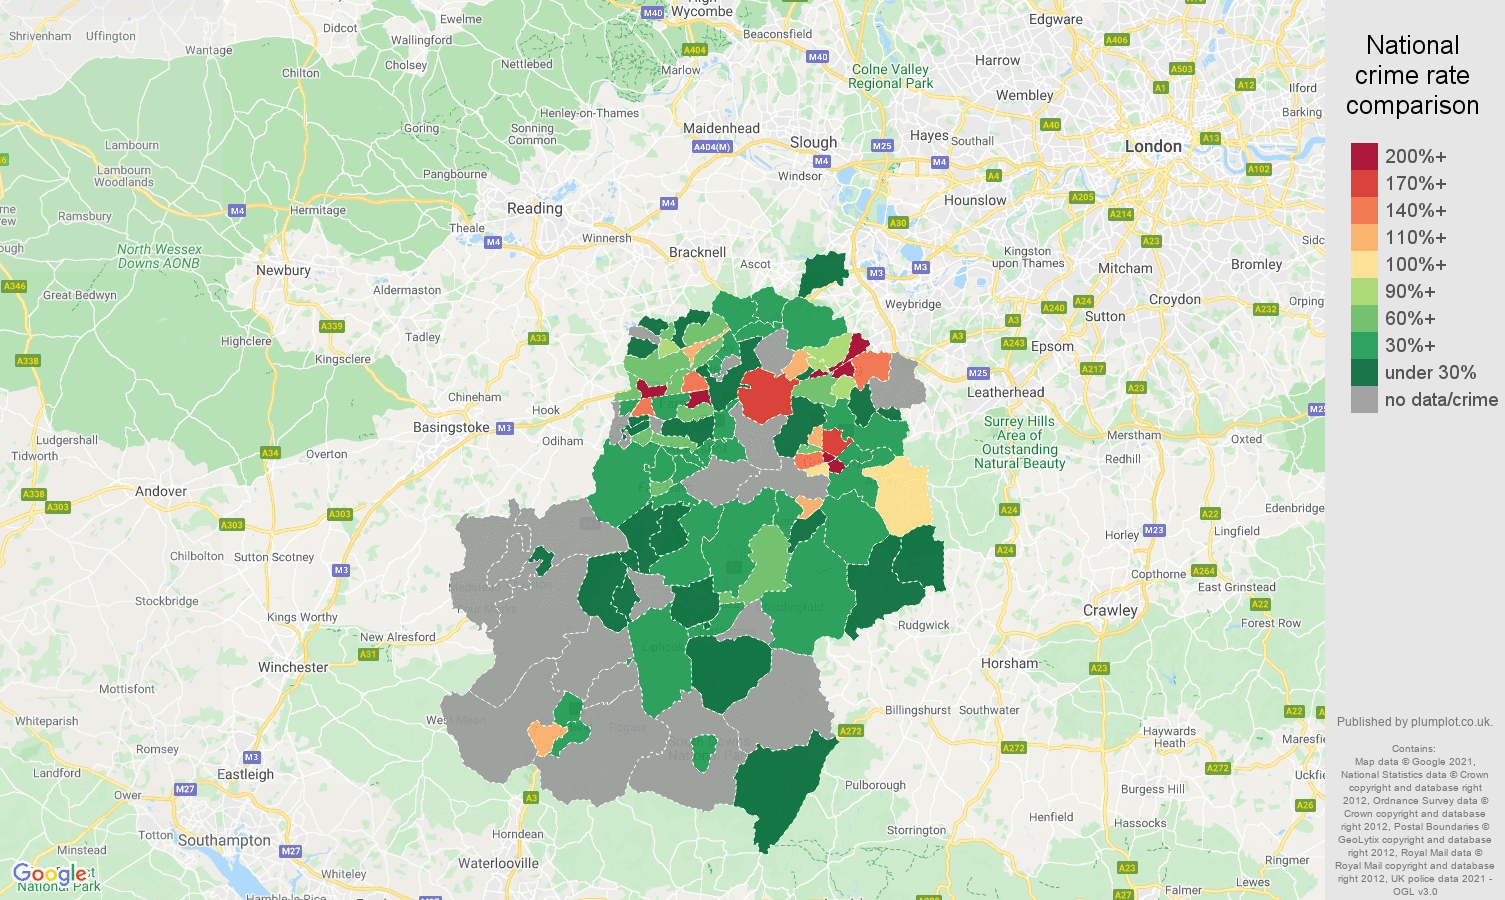 Guildford bicycle theft crime rate comparison map